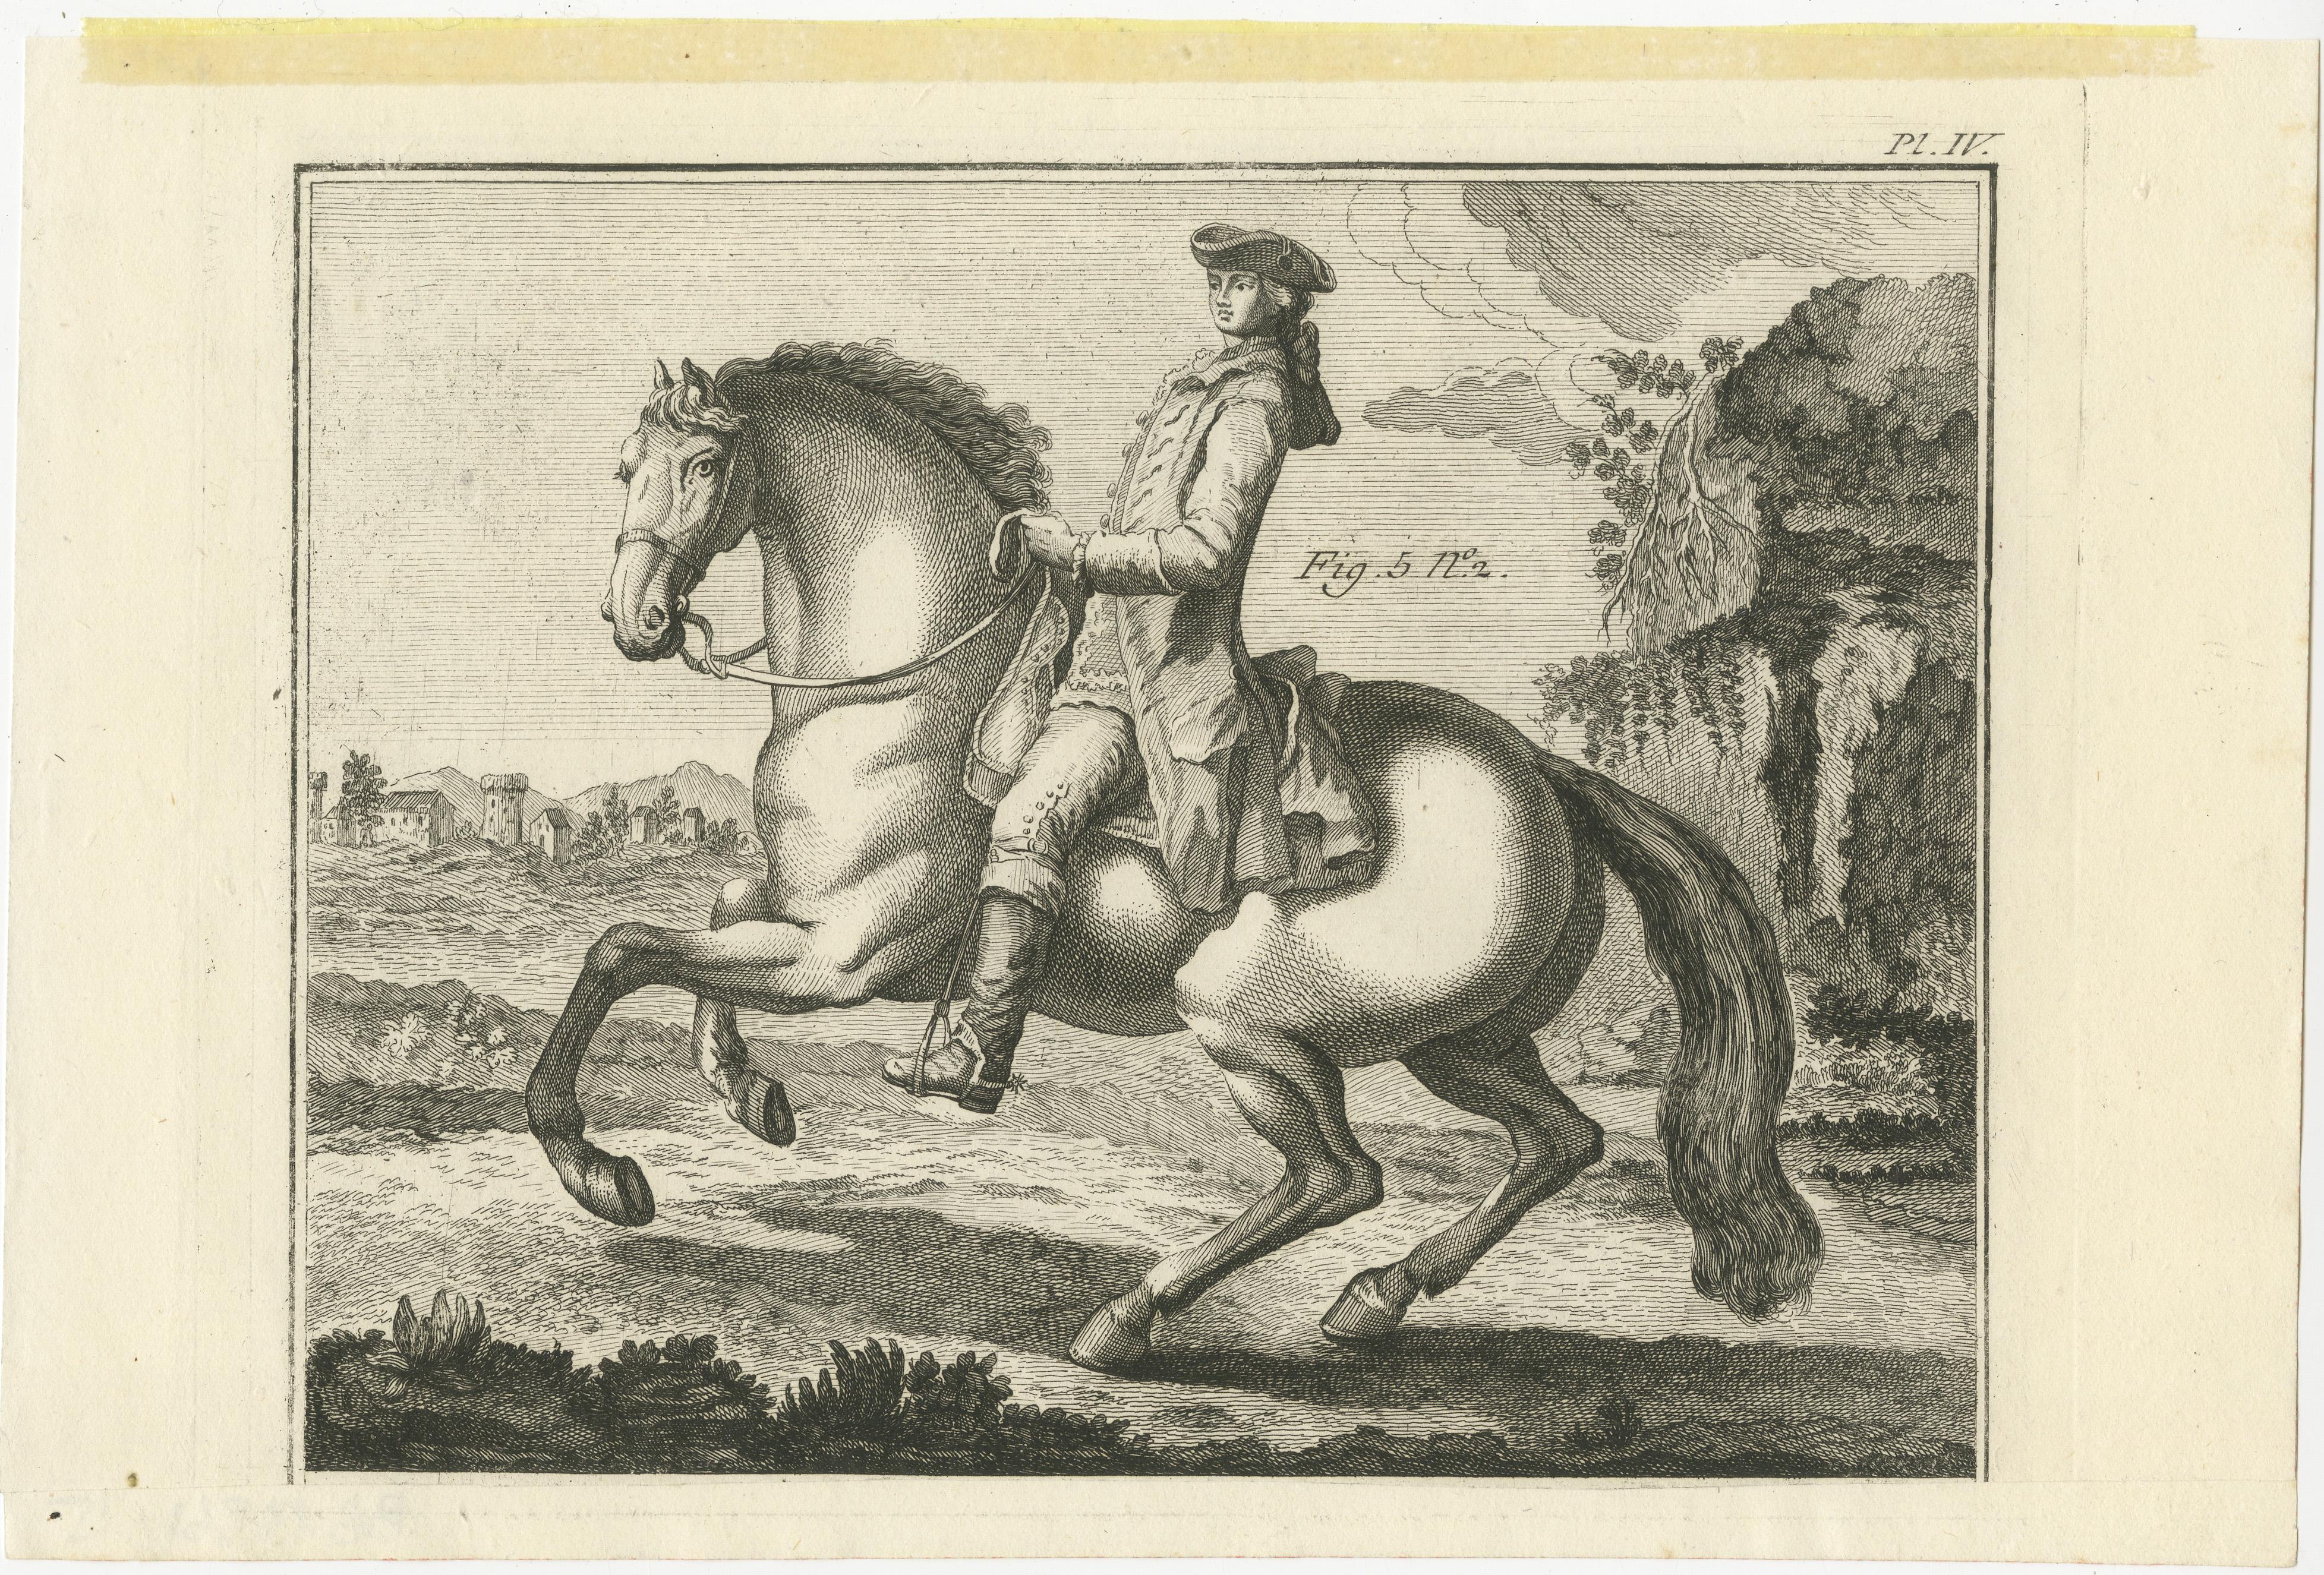 Antique print titled 'Manege, le Galop uni à gauche et le Galop faux à gauche. Copper engraving of horse riding: United Gallop on Left Lead, and Disunited Gallop on Left Lead.

Originally published on one sheet, now two individual sheets. With